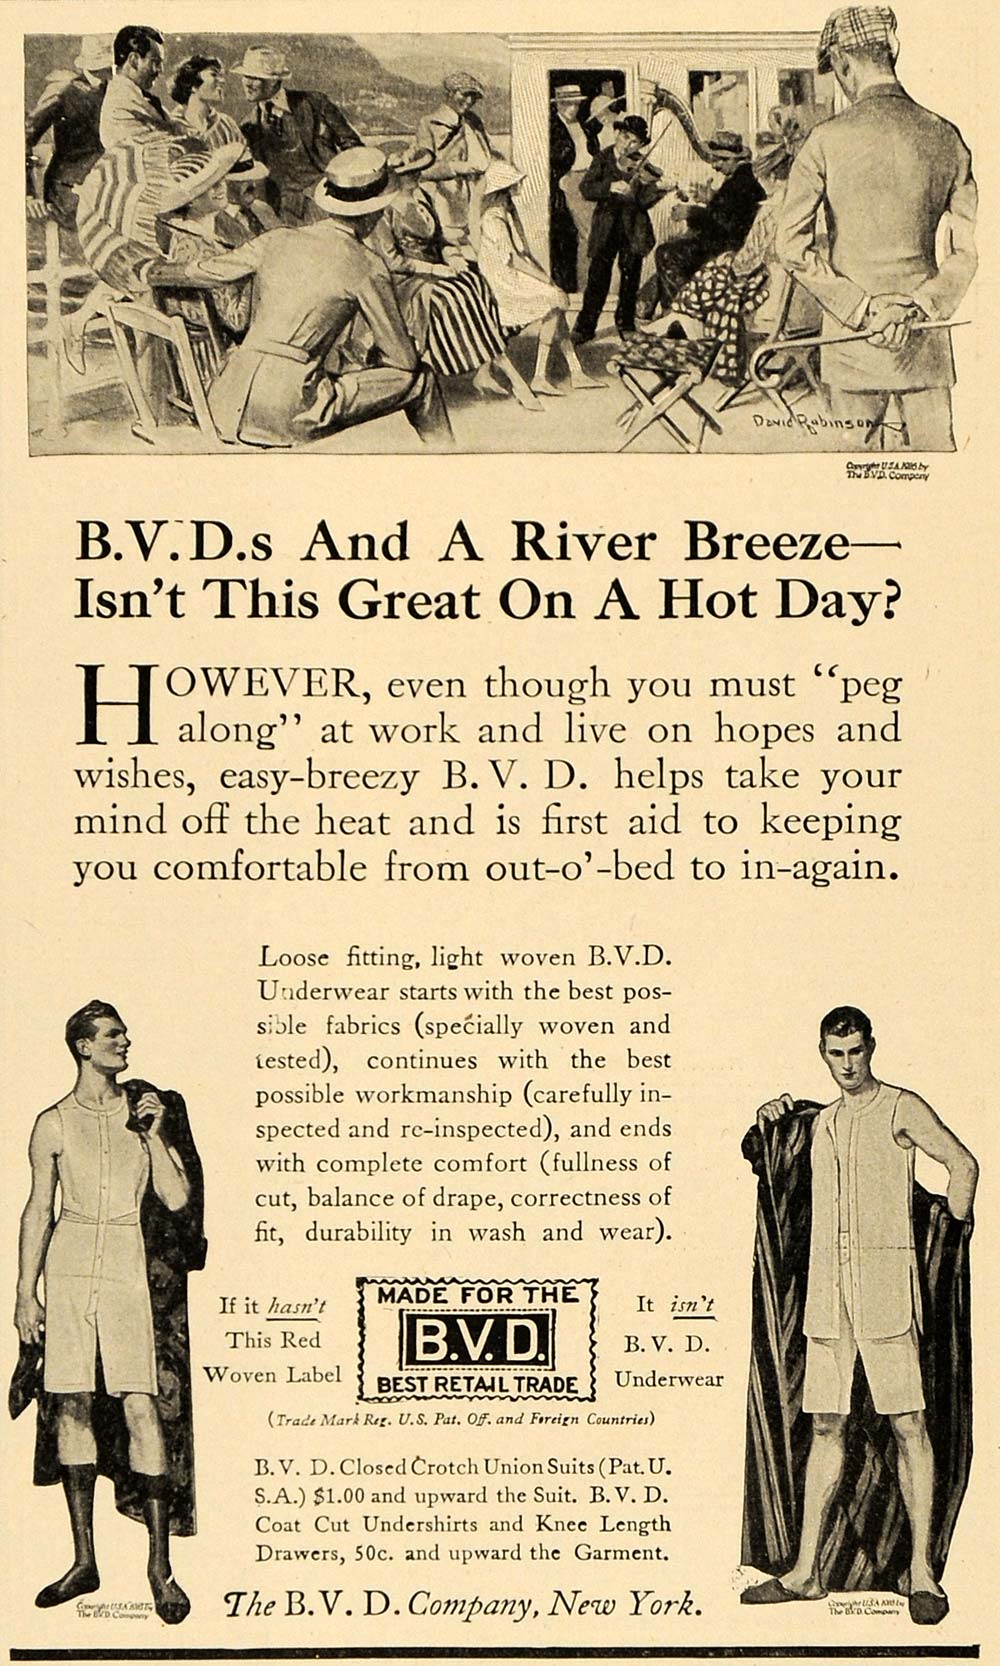 After a plunge & after - cool clean B V D Men's Underwear ad 1919 Col